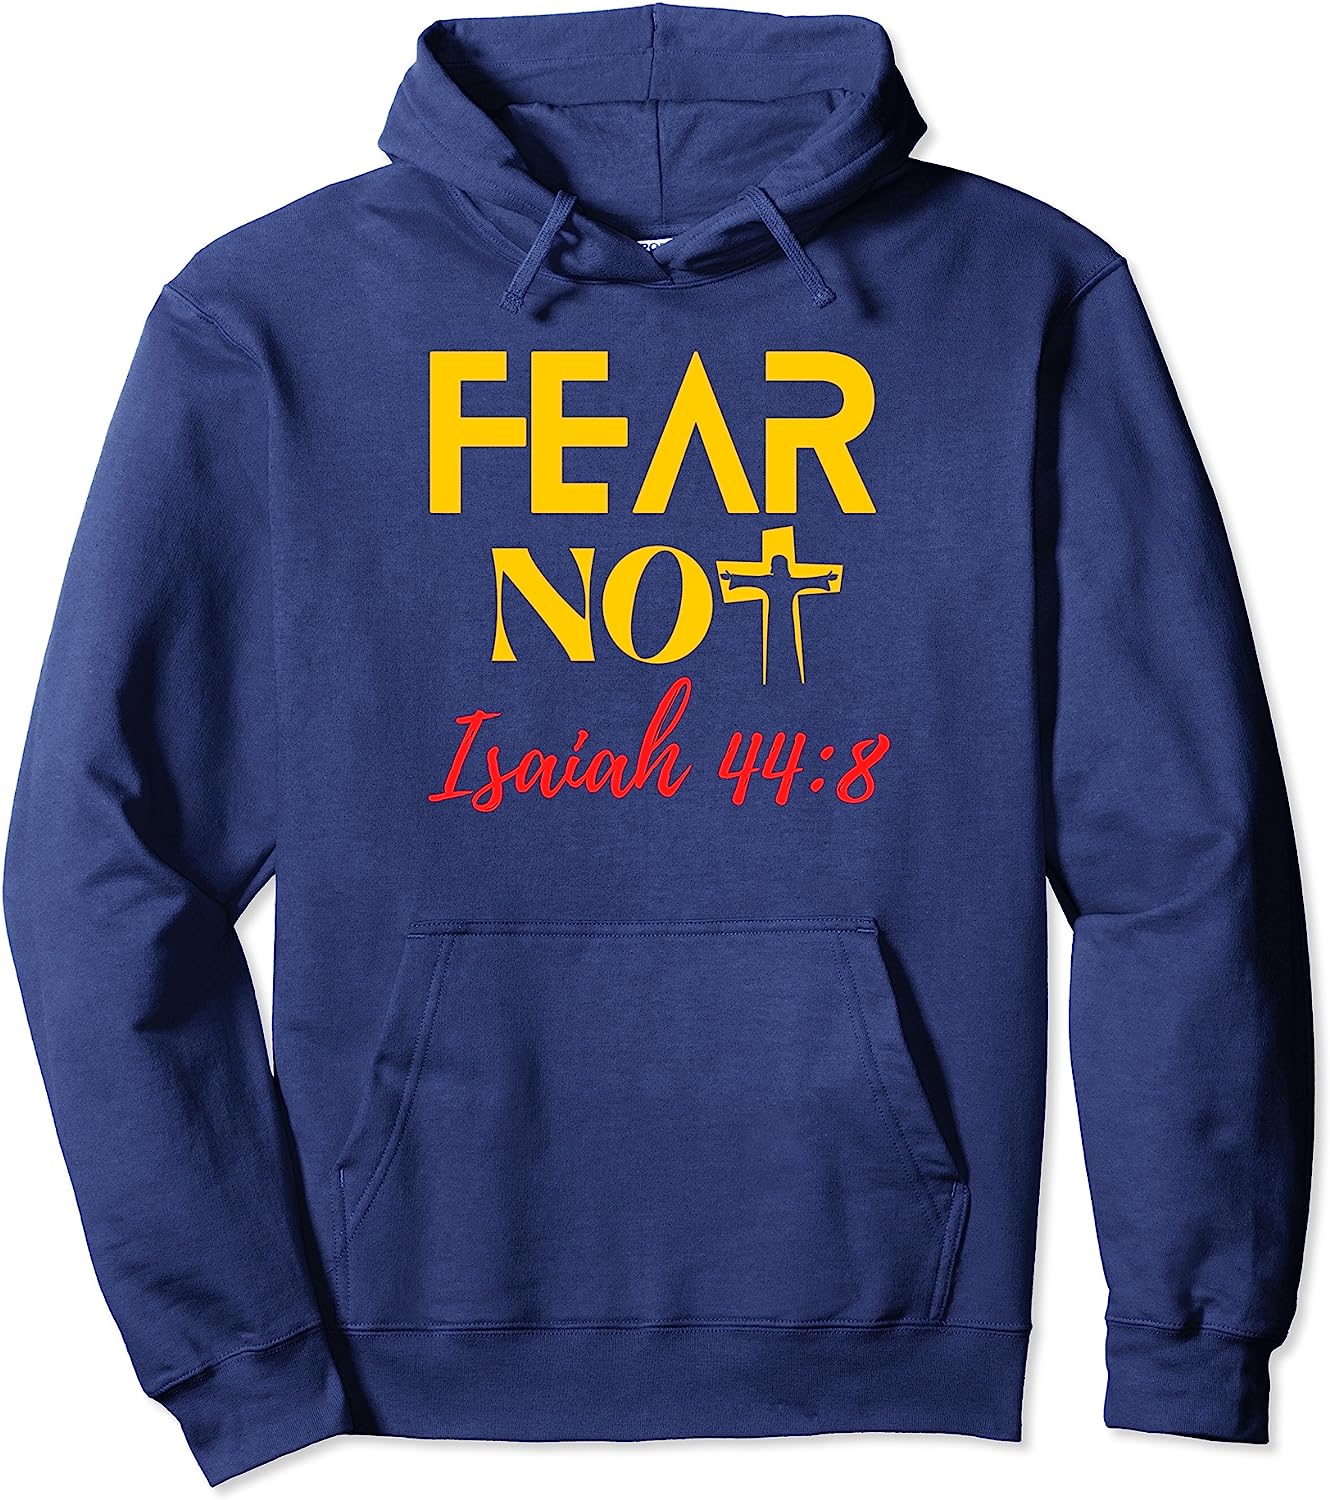 Fear Not - Pullover Hoodie - Fun, Inspirational Design by Crucial Key